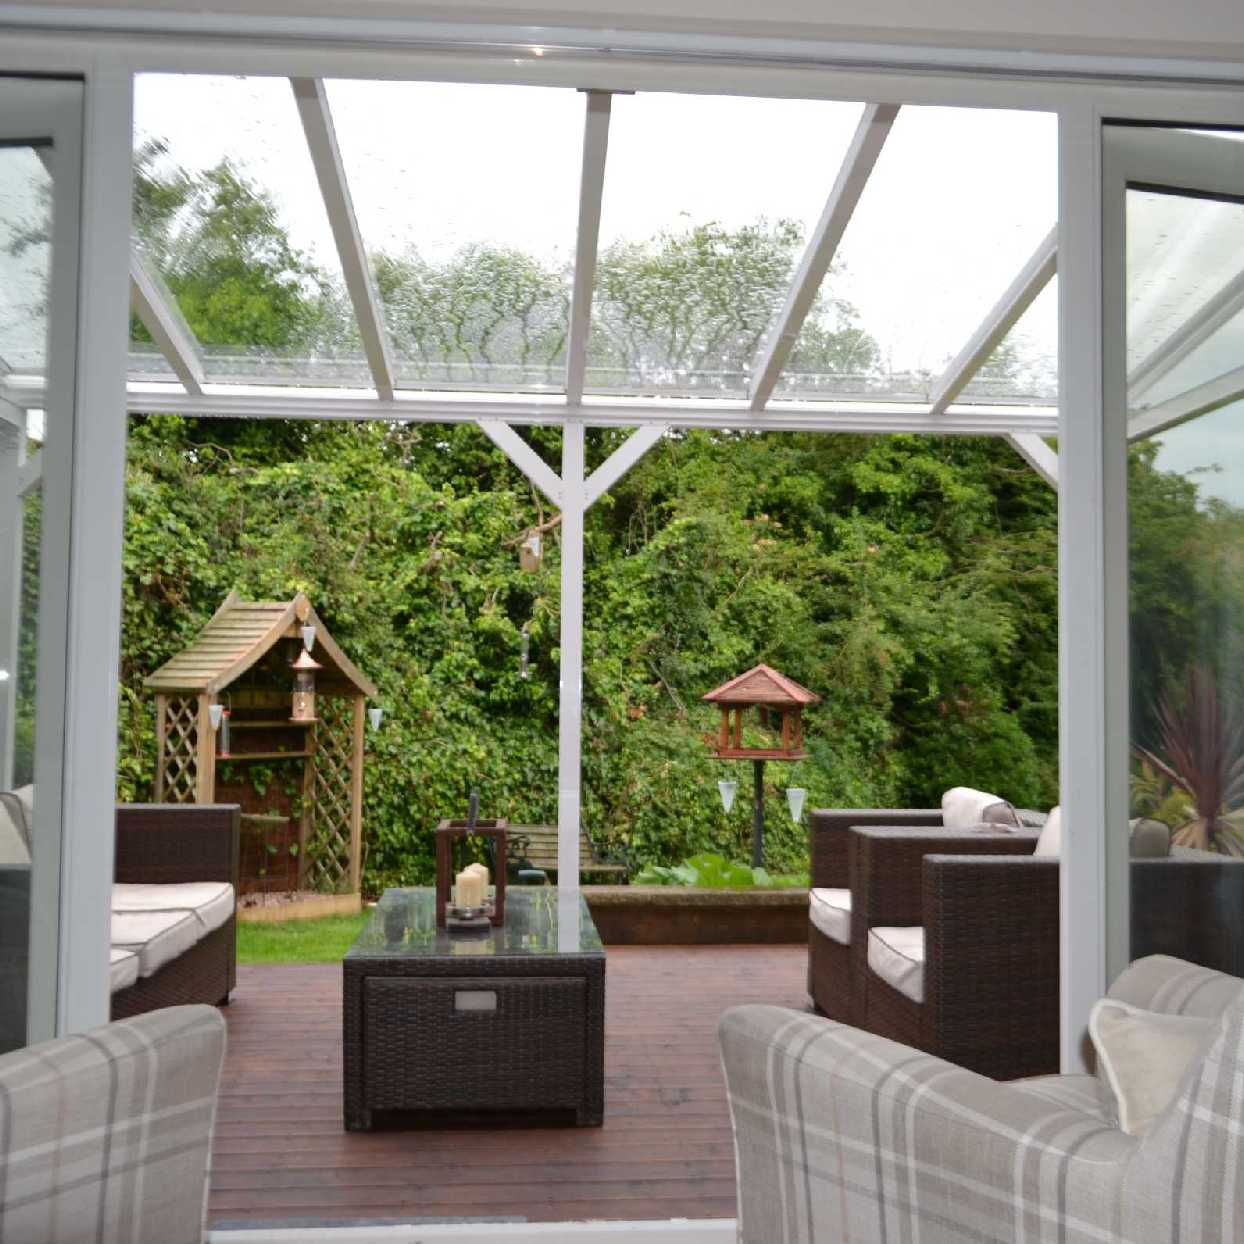 Buy Omega Smart Free-Standing, White MonoPitch Roof Canopy with 6mm Glass Clear Plate Polycarbonate Glazing - 6.3m (W) x 2.0m (P), (8) Supporting Posts online today